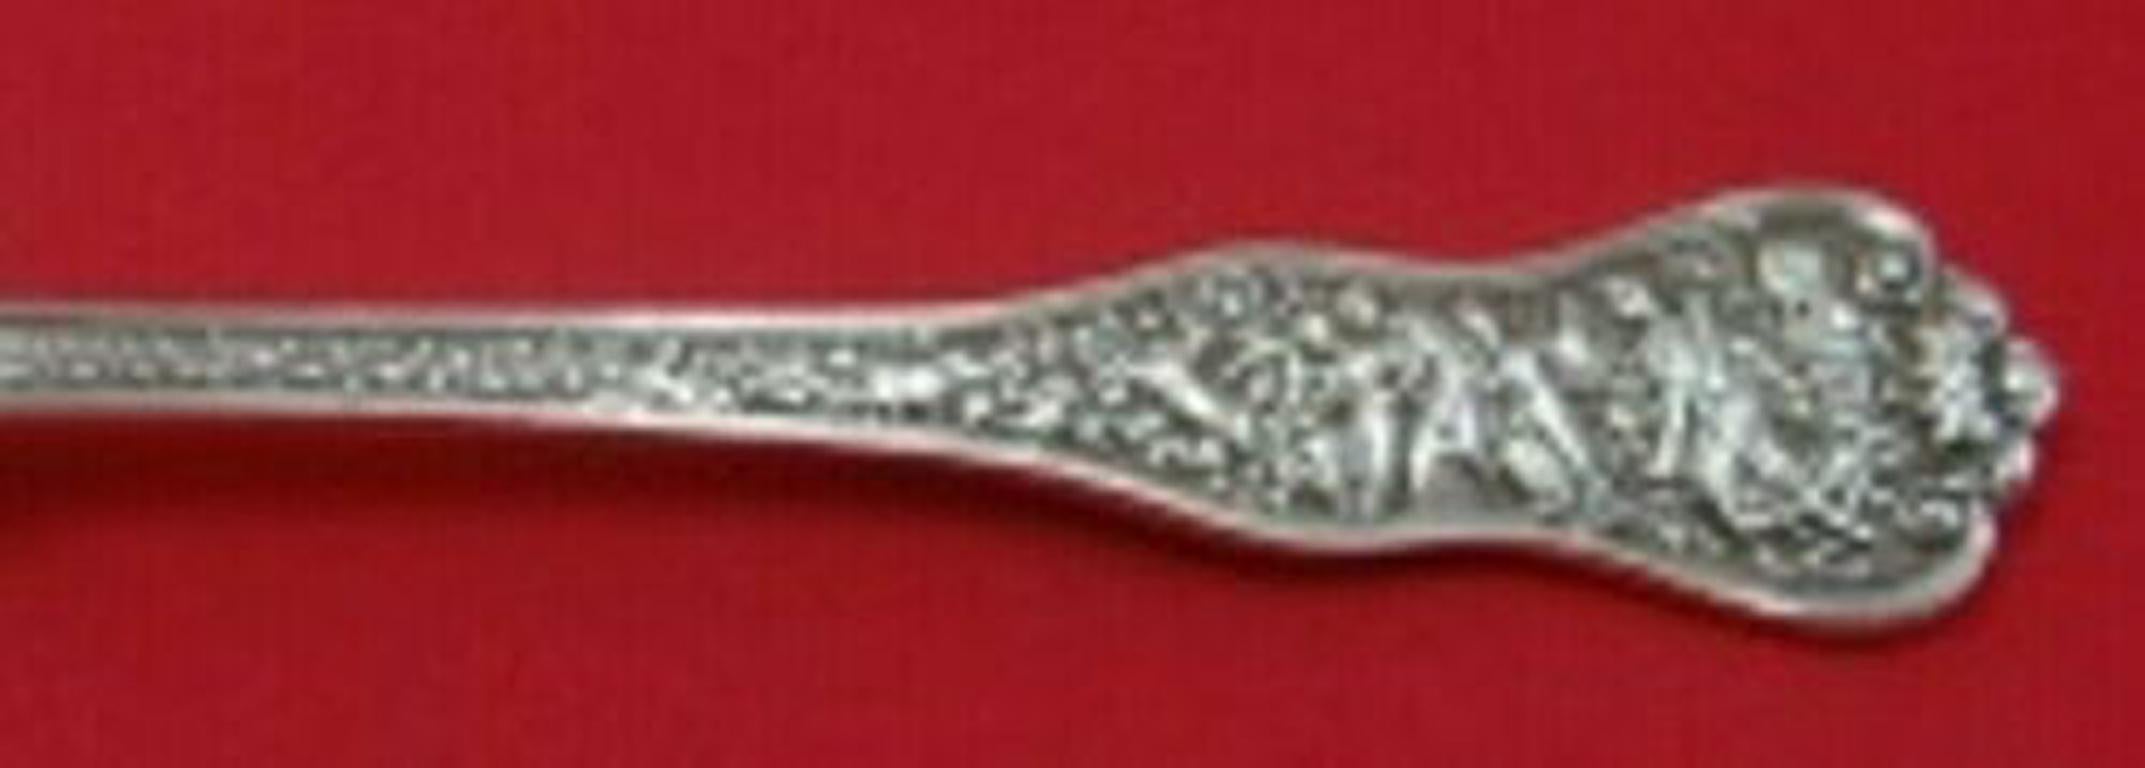 Sterling silver pastry fork 3-tine 6